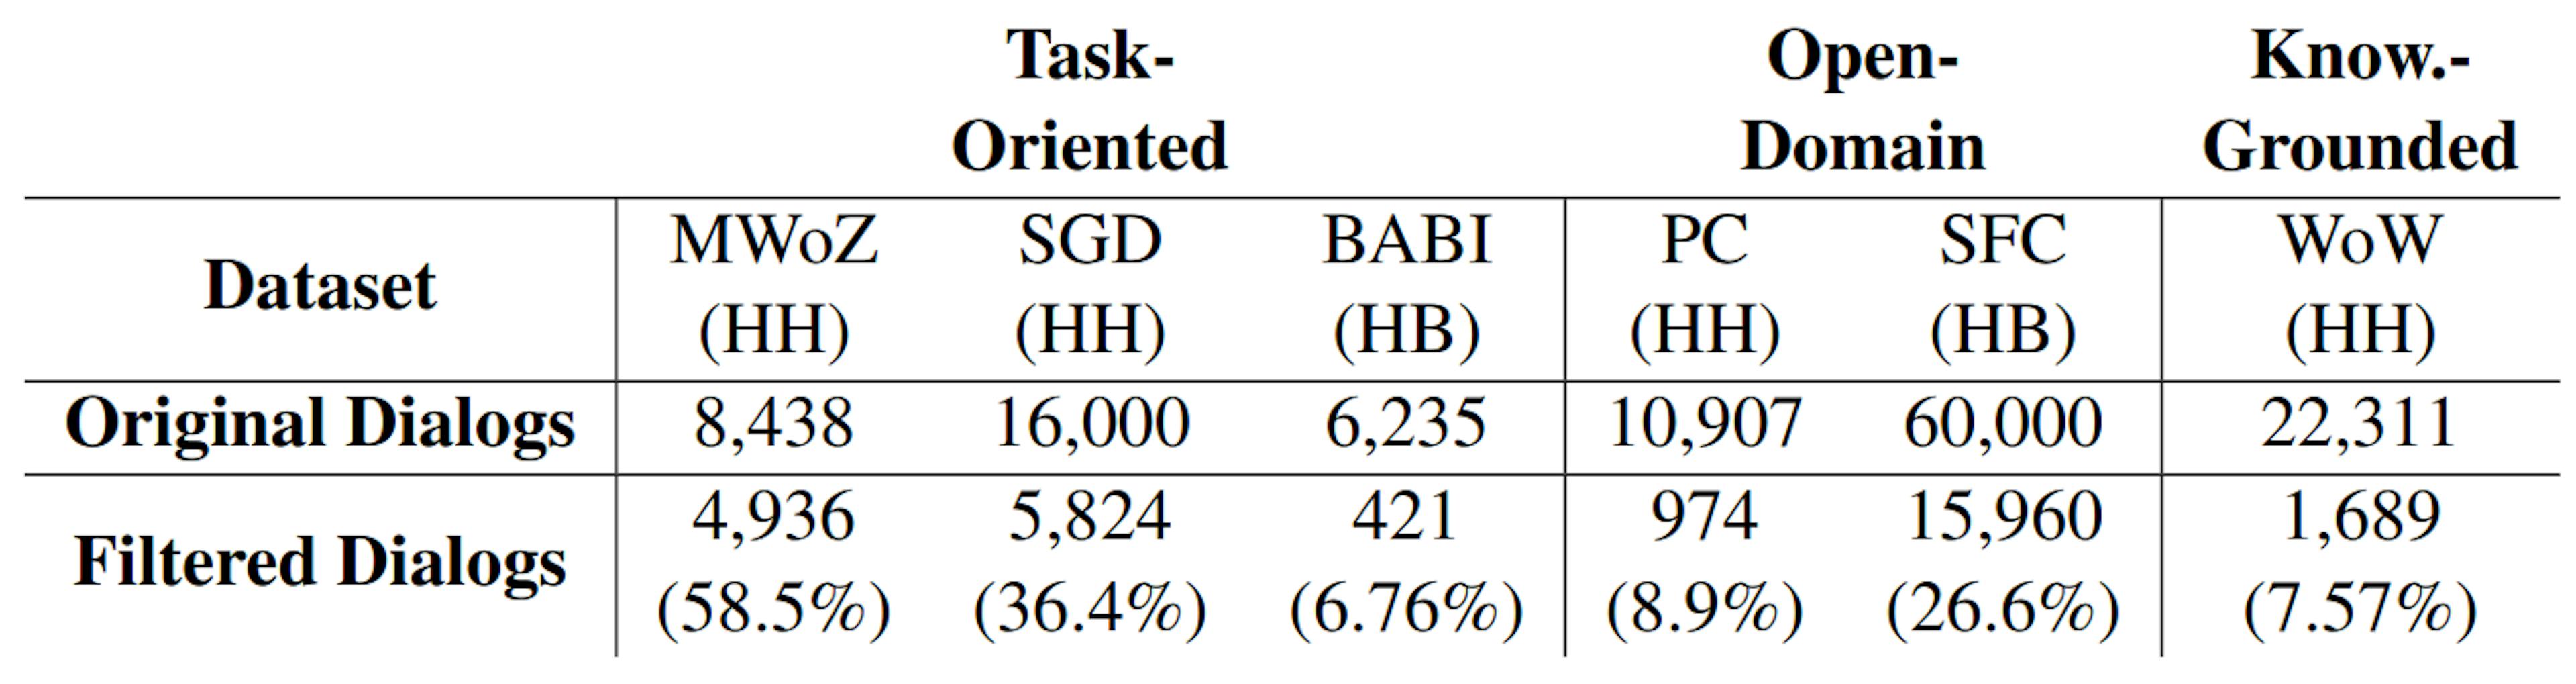 Table 6: Size comparison between the filtered subsets and the original datasets. The numbers in brackets show the ratio of relevant dialogs to the original dataset sizes.